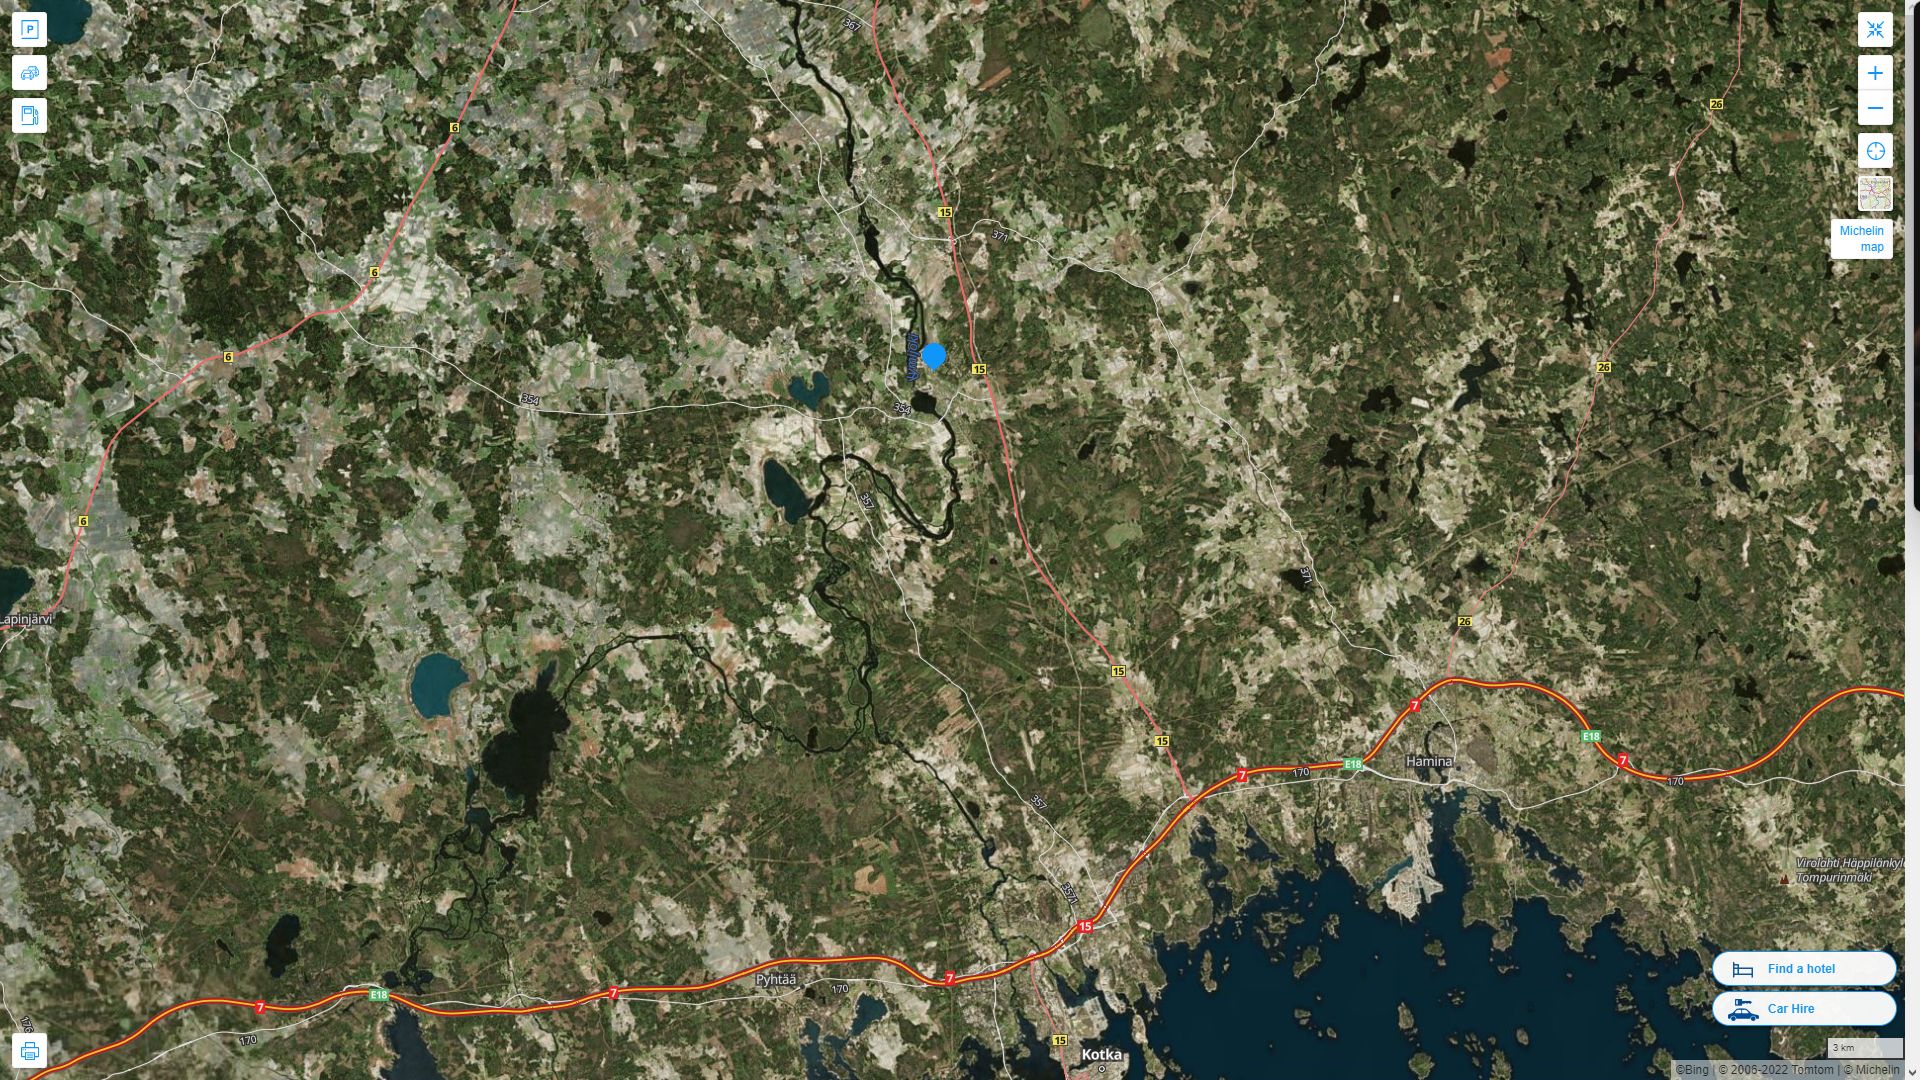 Anjalankoski Highway and Road Map with Satellite View